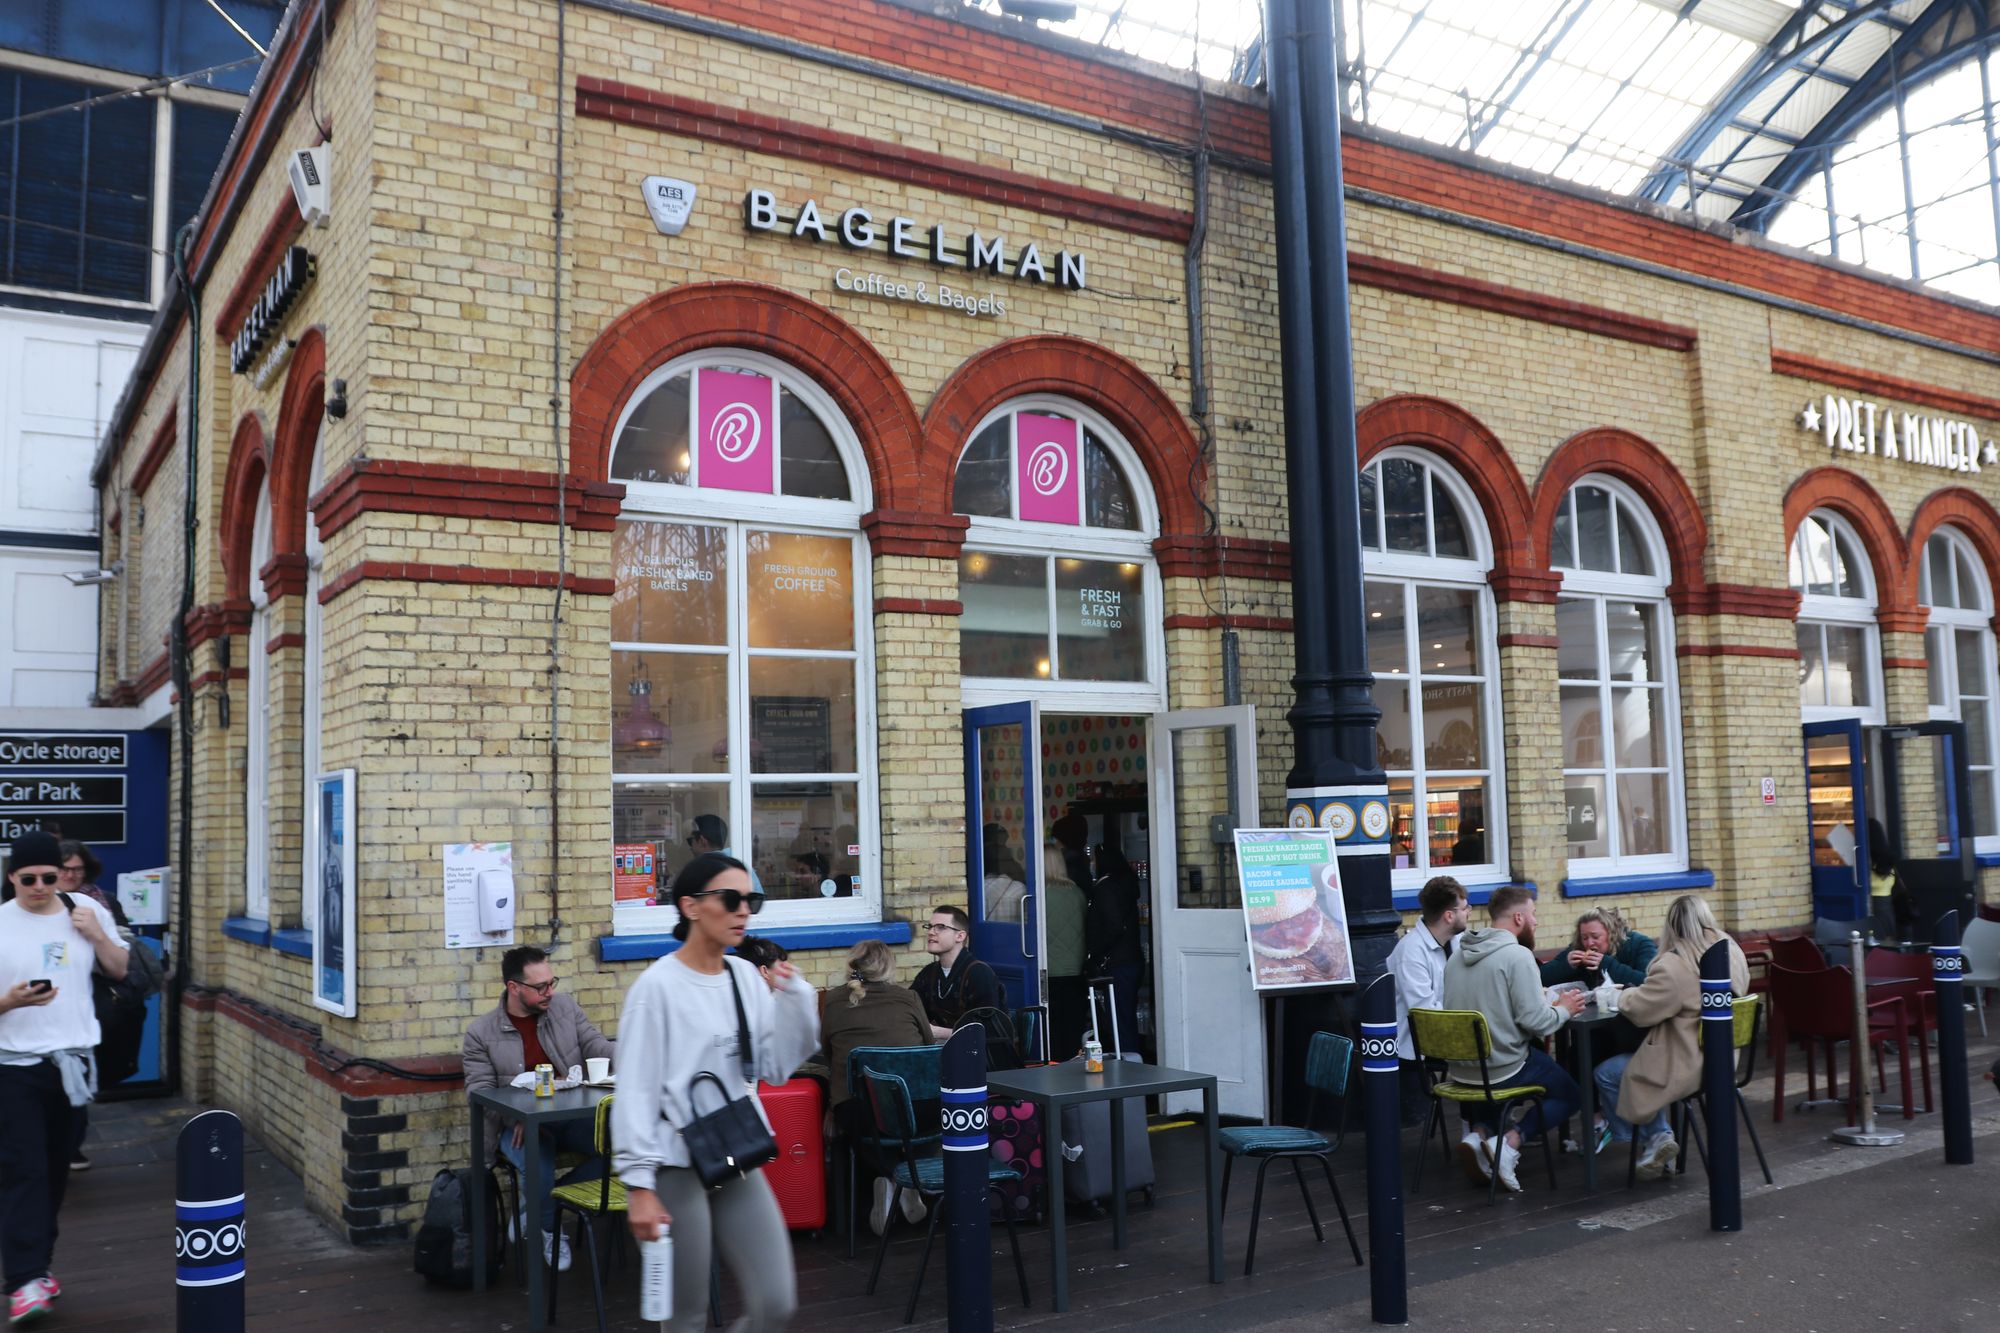 A wide shot of the outside of Bagelman, showing full tables of people eating.